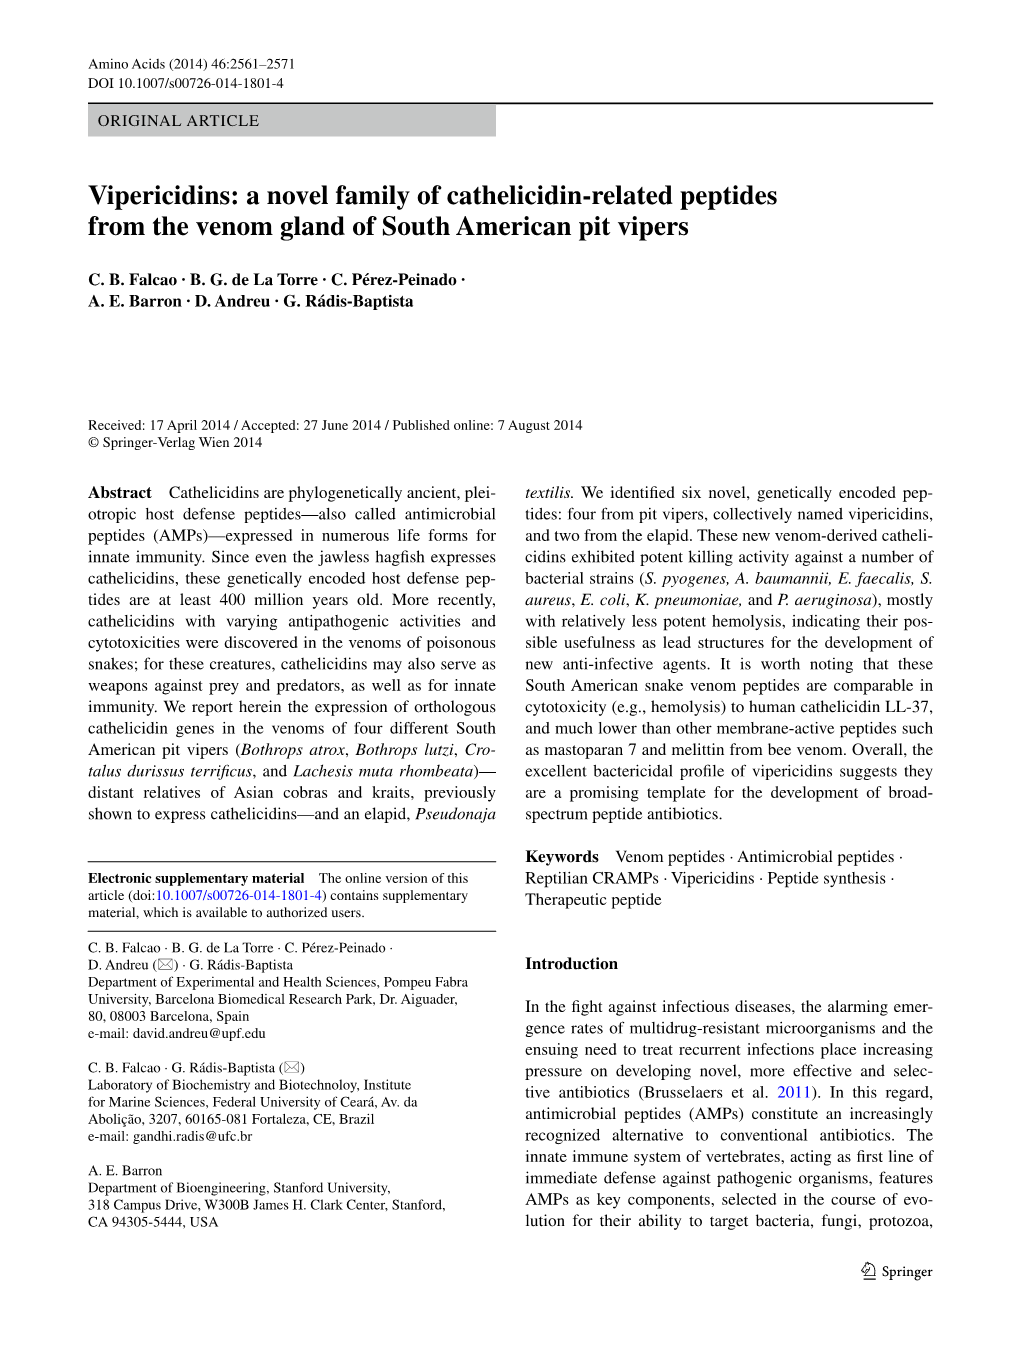 Vipericidins: a Novel Family of Cathelicidin‑Related Peptides from the Venom Gland of South American Pit Vipers